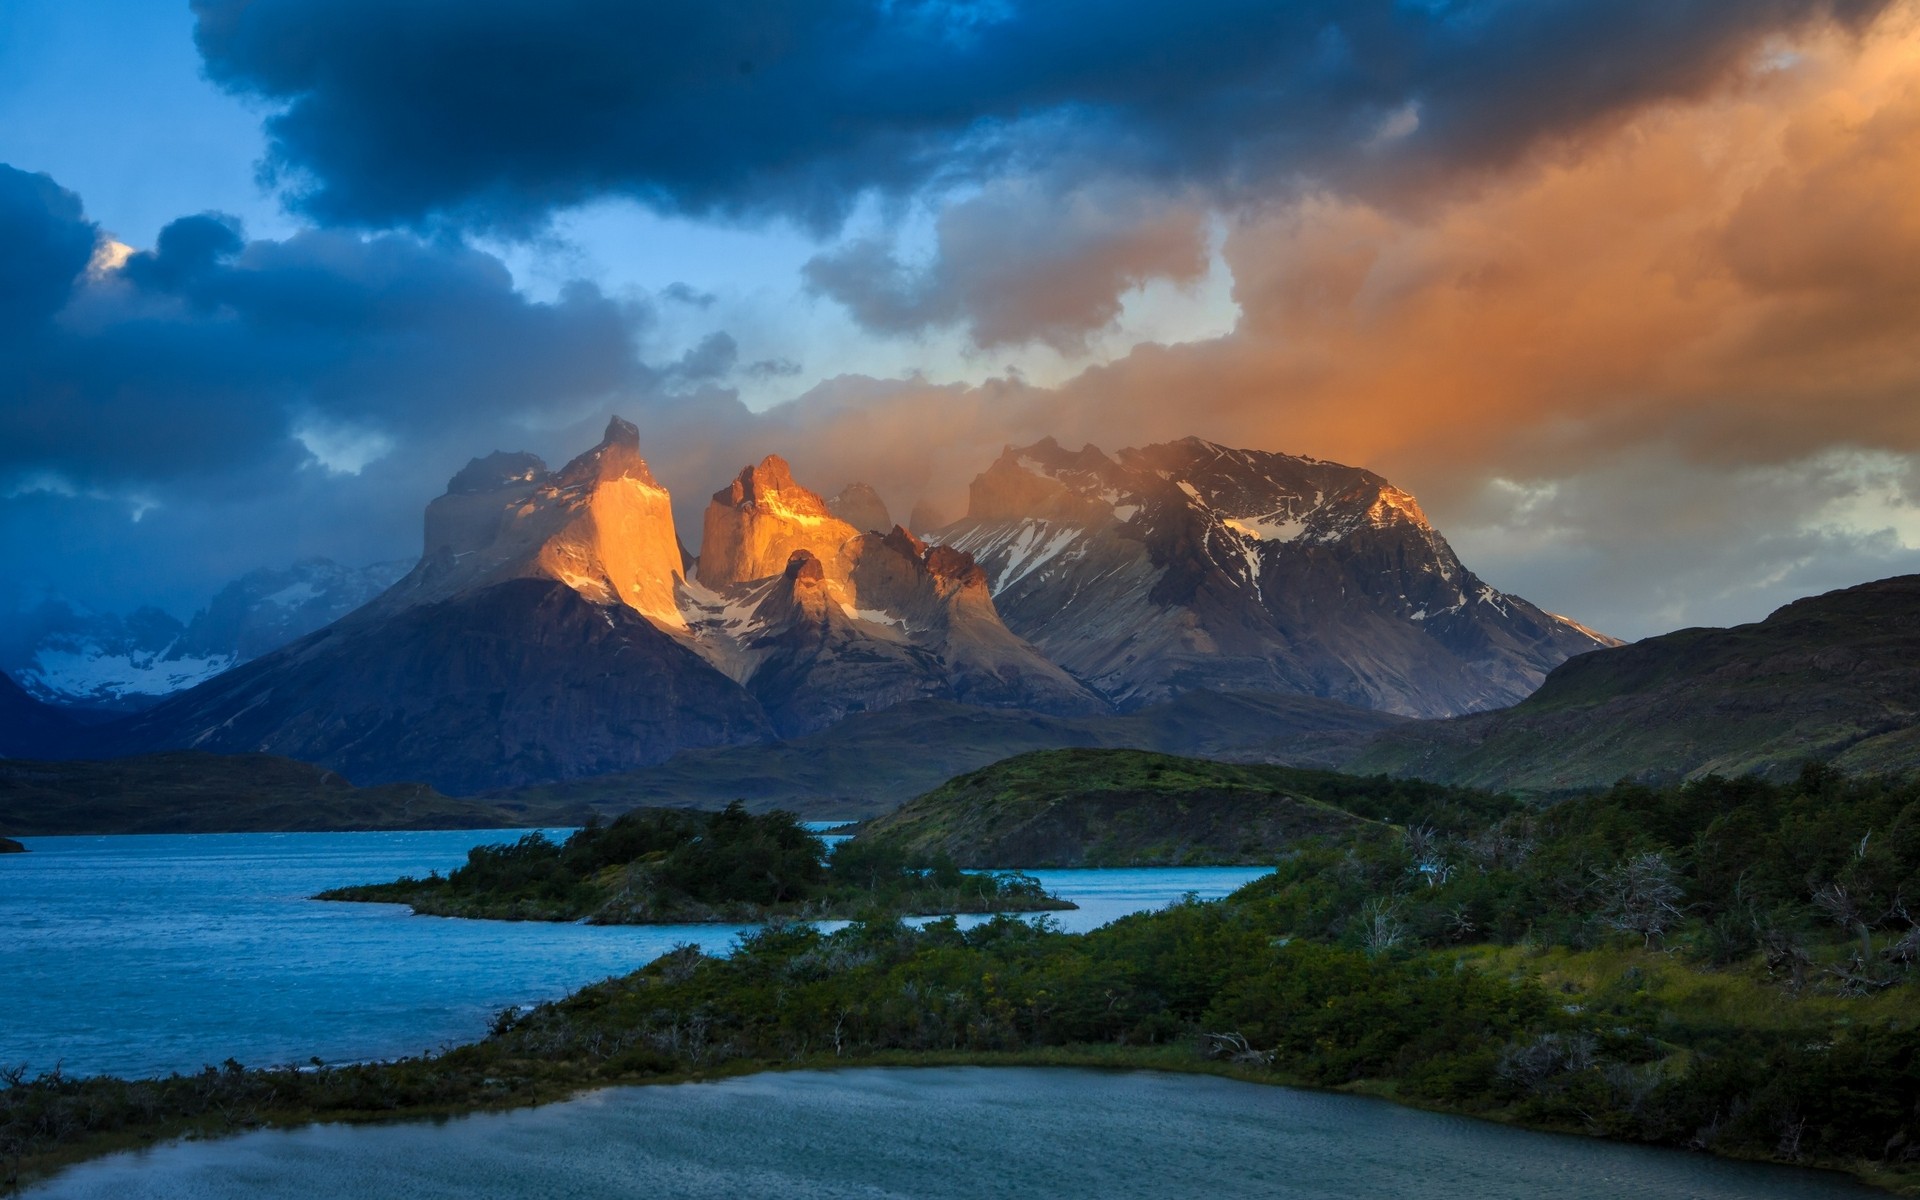 General 1920x1200 landscape nature mountains lake clouds Chile Torres del Paine snowy peak shrubs sunlight trees South America